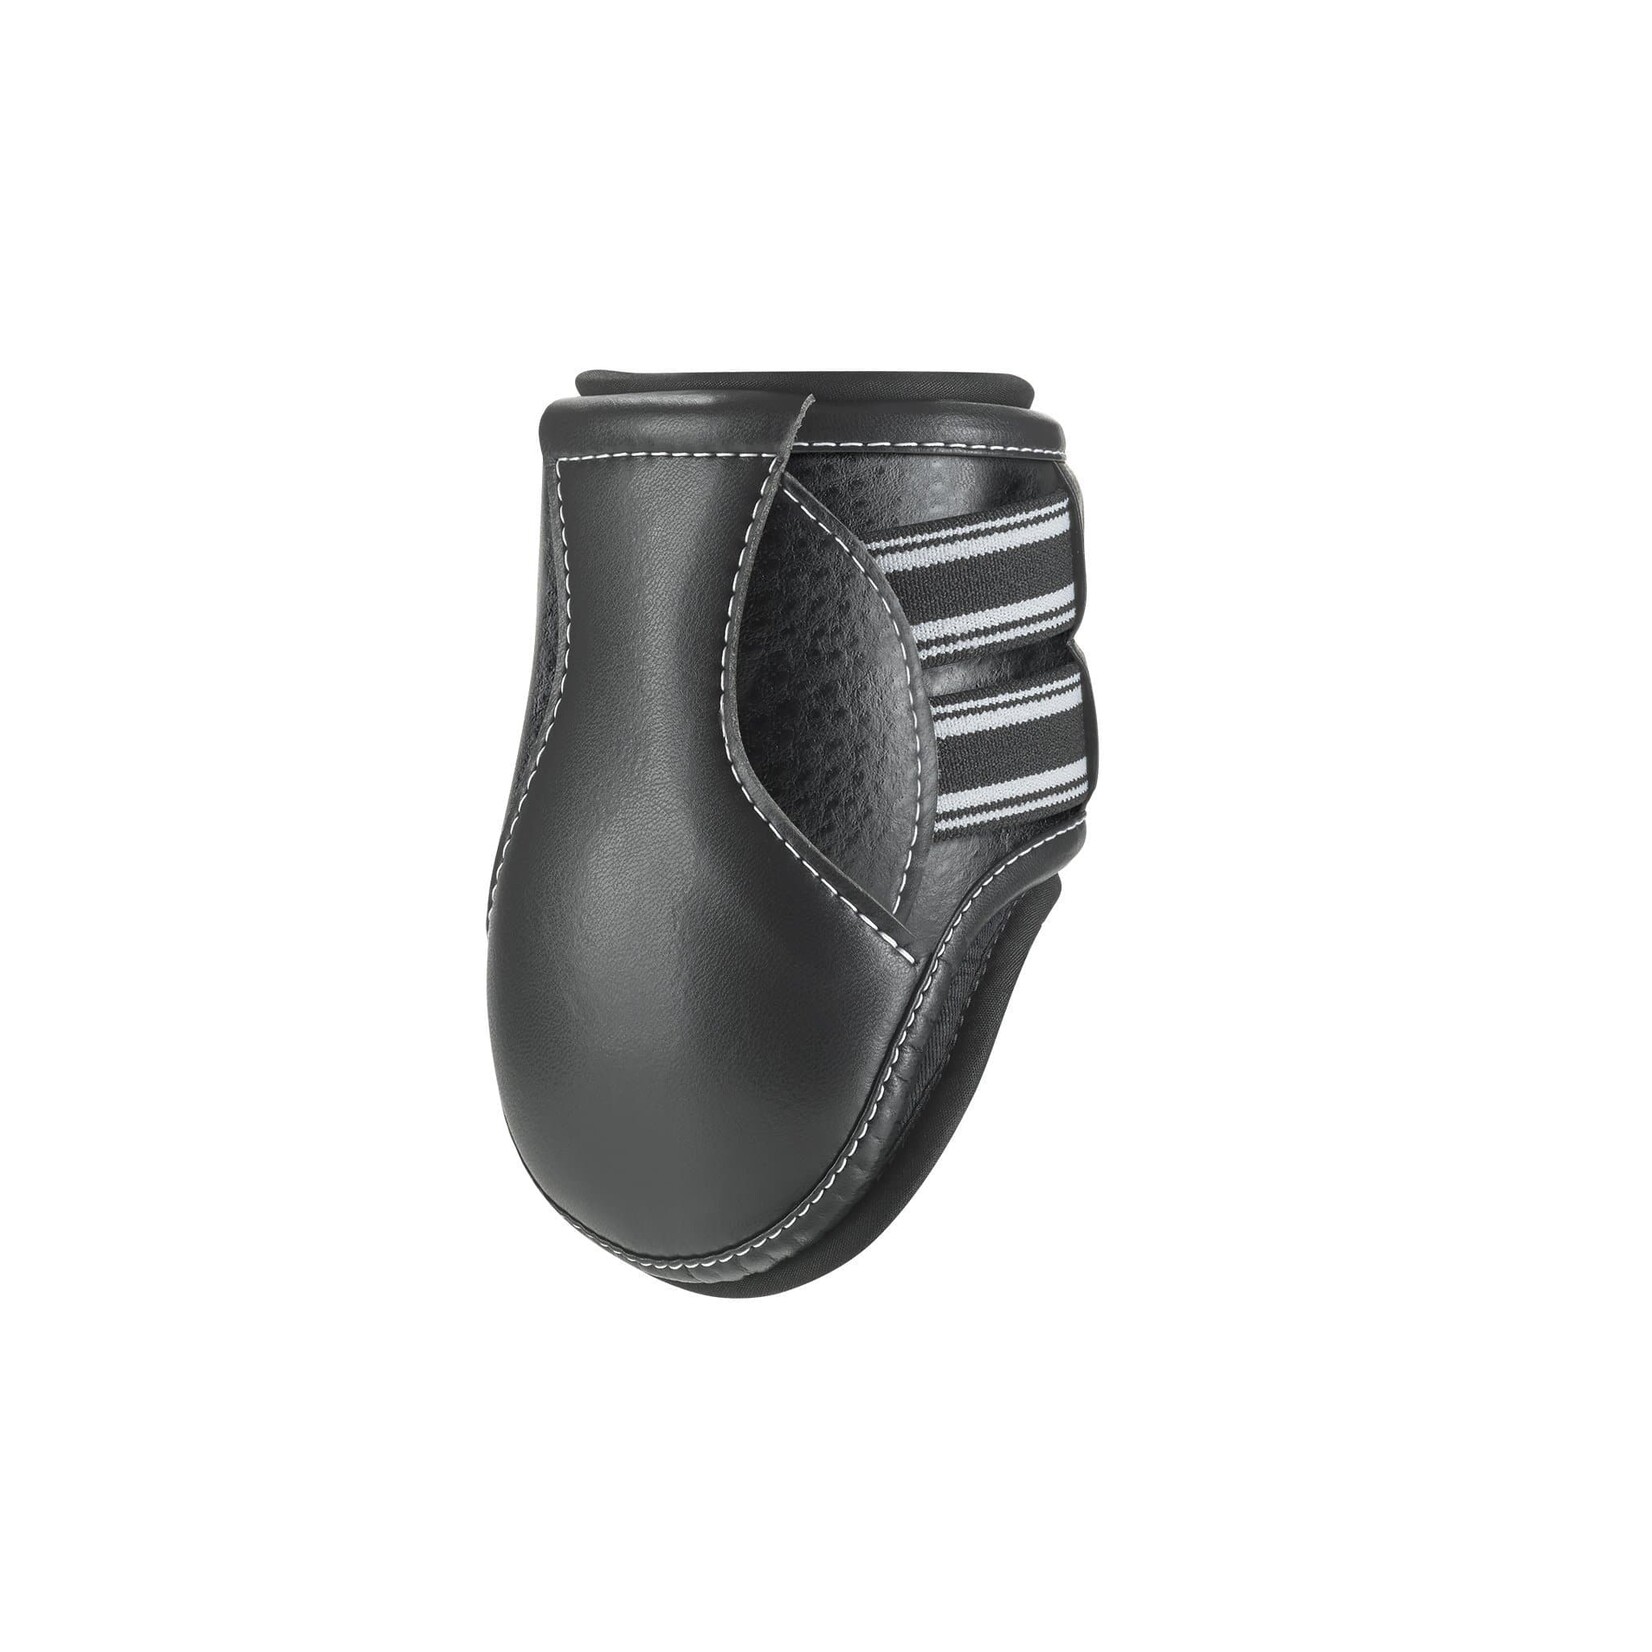 Equifit D-Teq Leather Ostrich Hind Boots